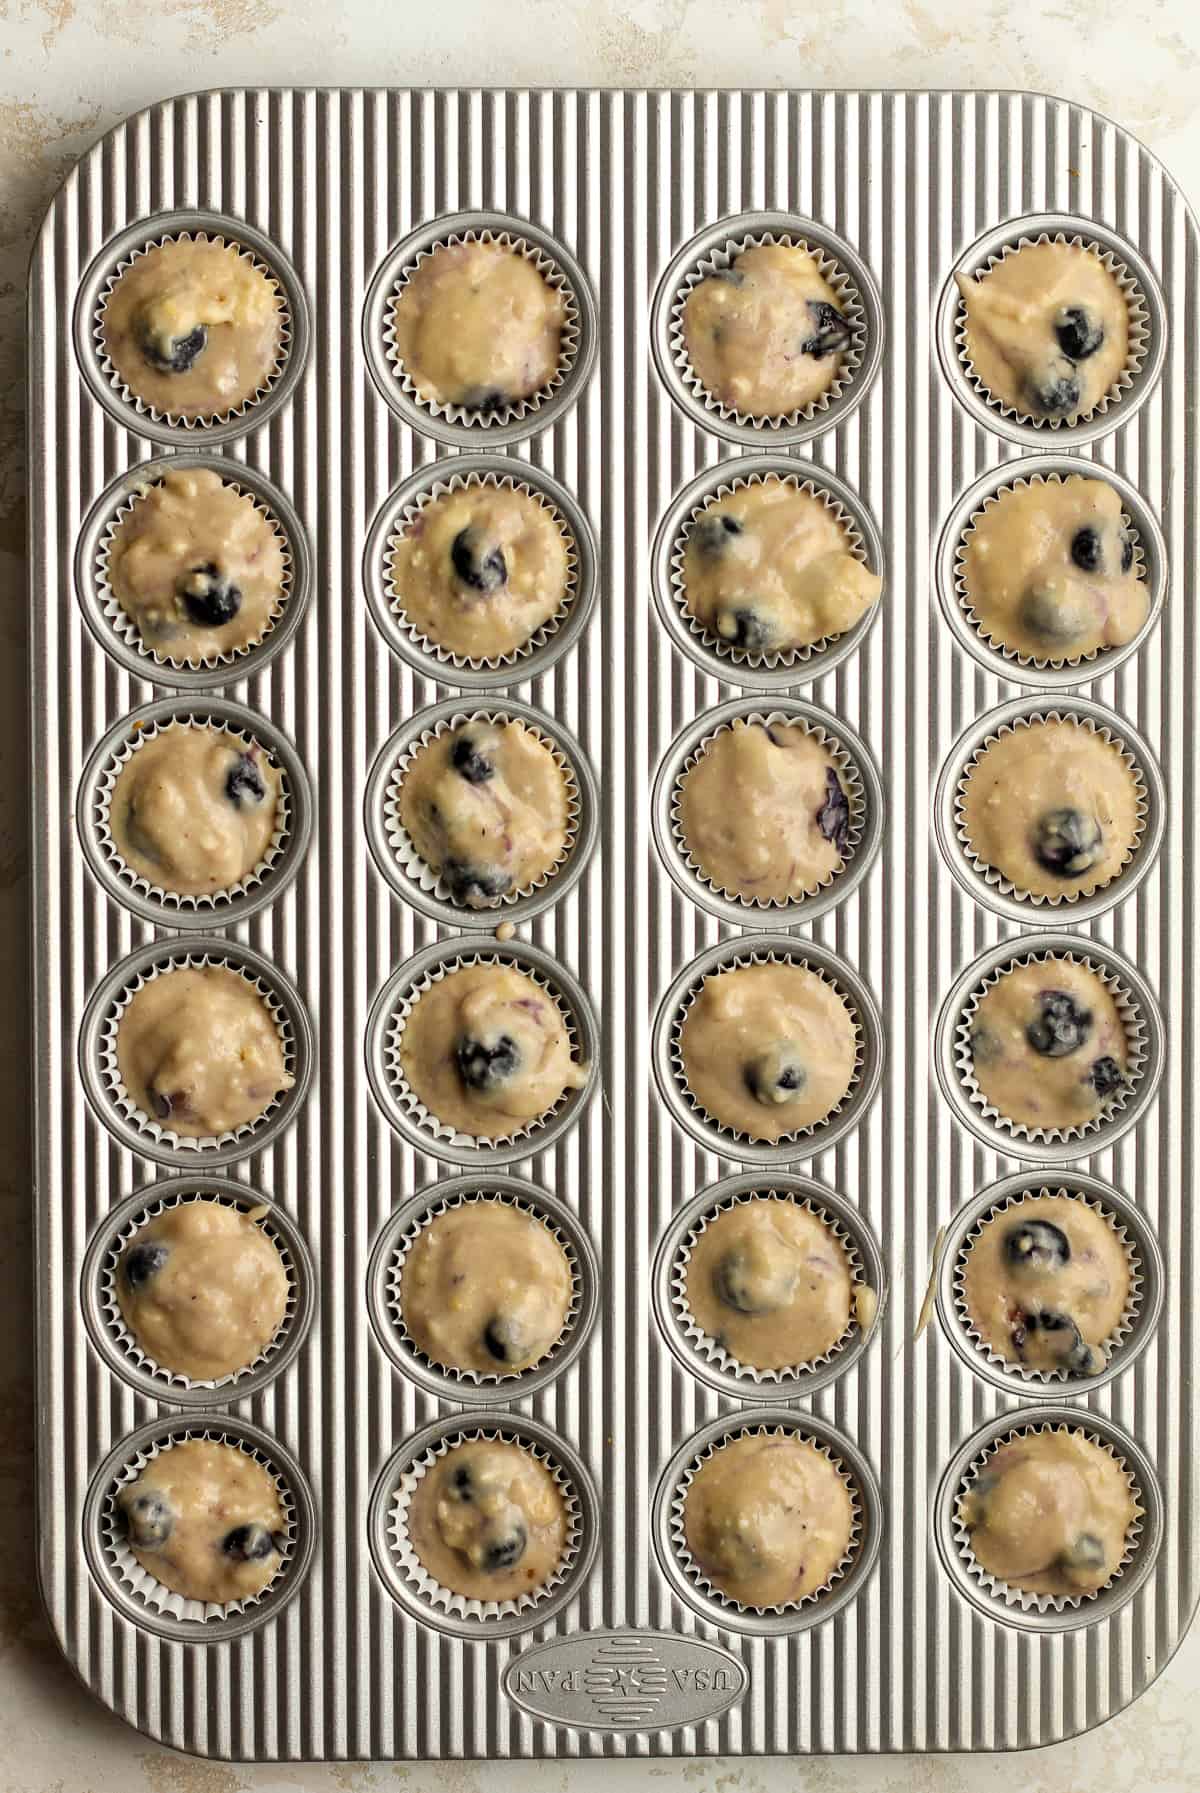 A mini muffin tin with blueberry batter.